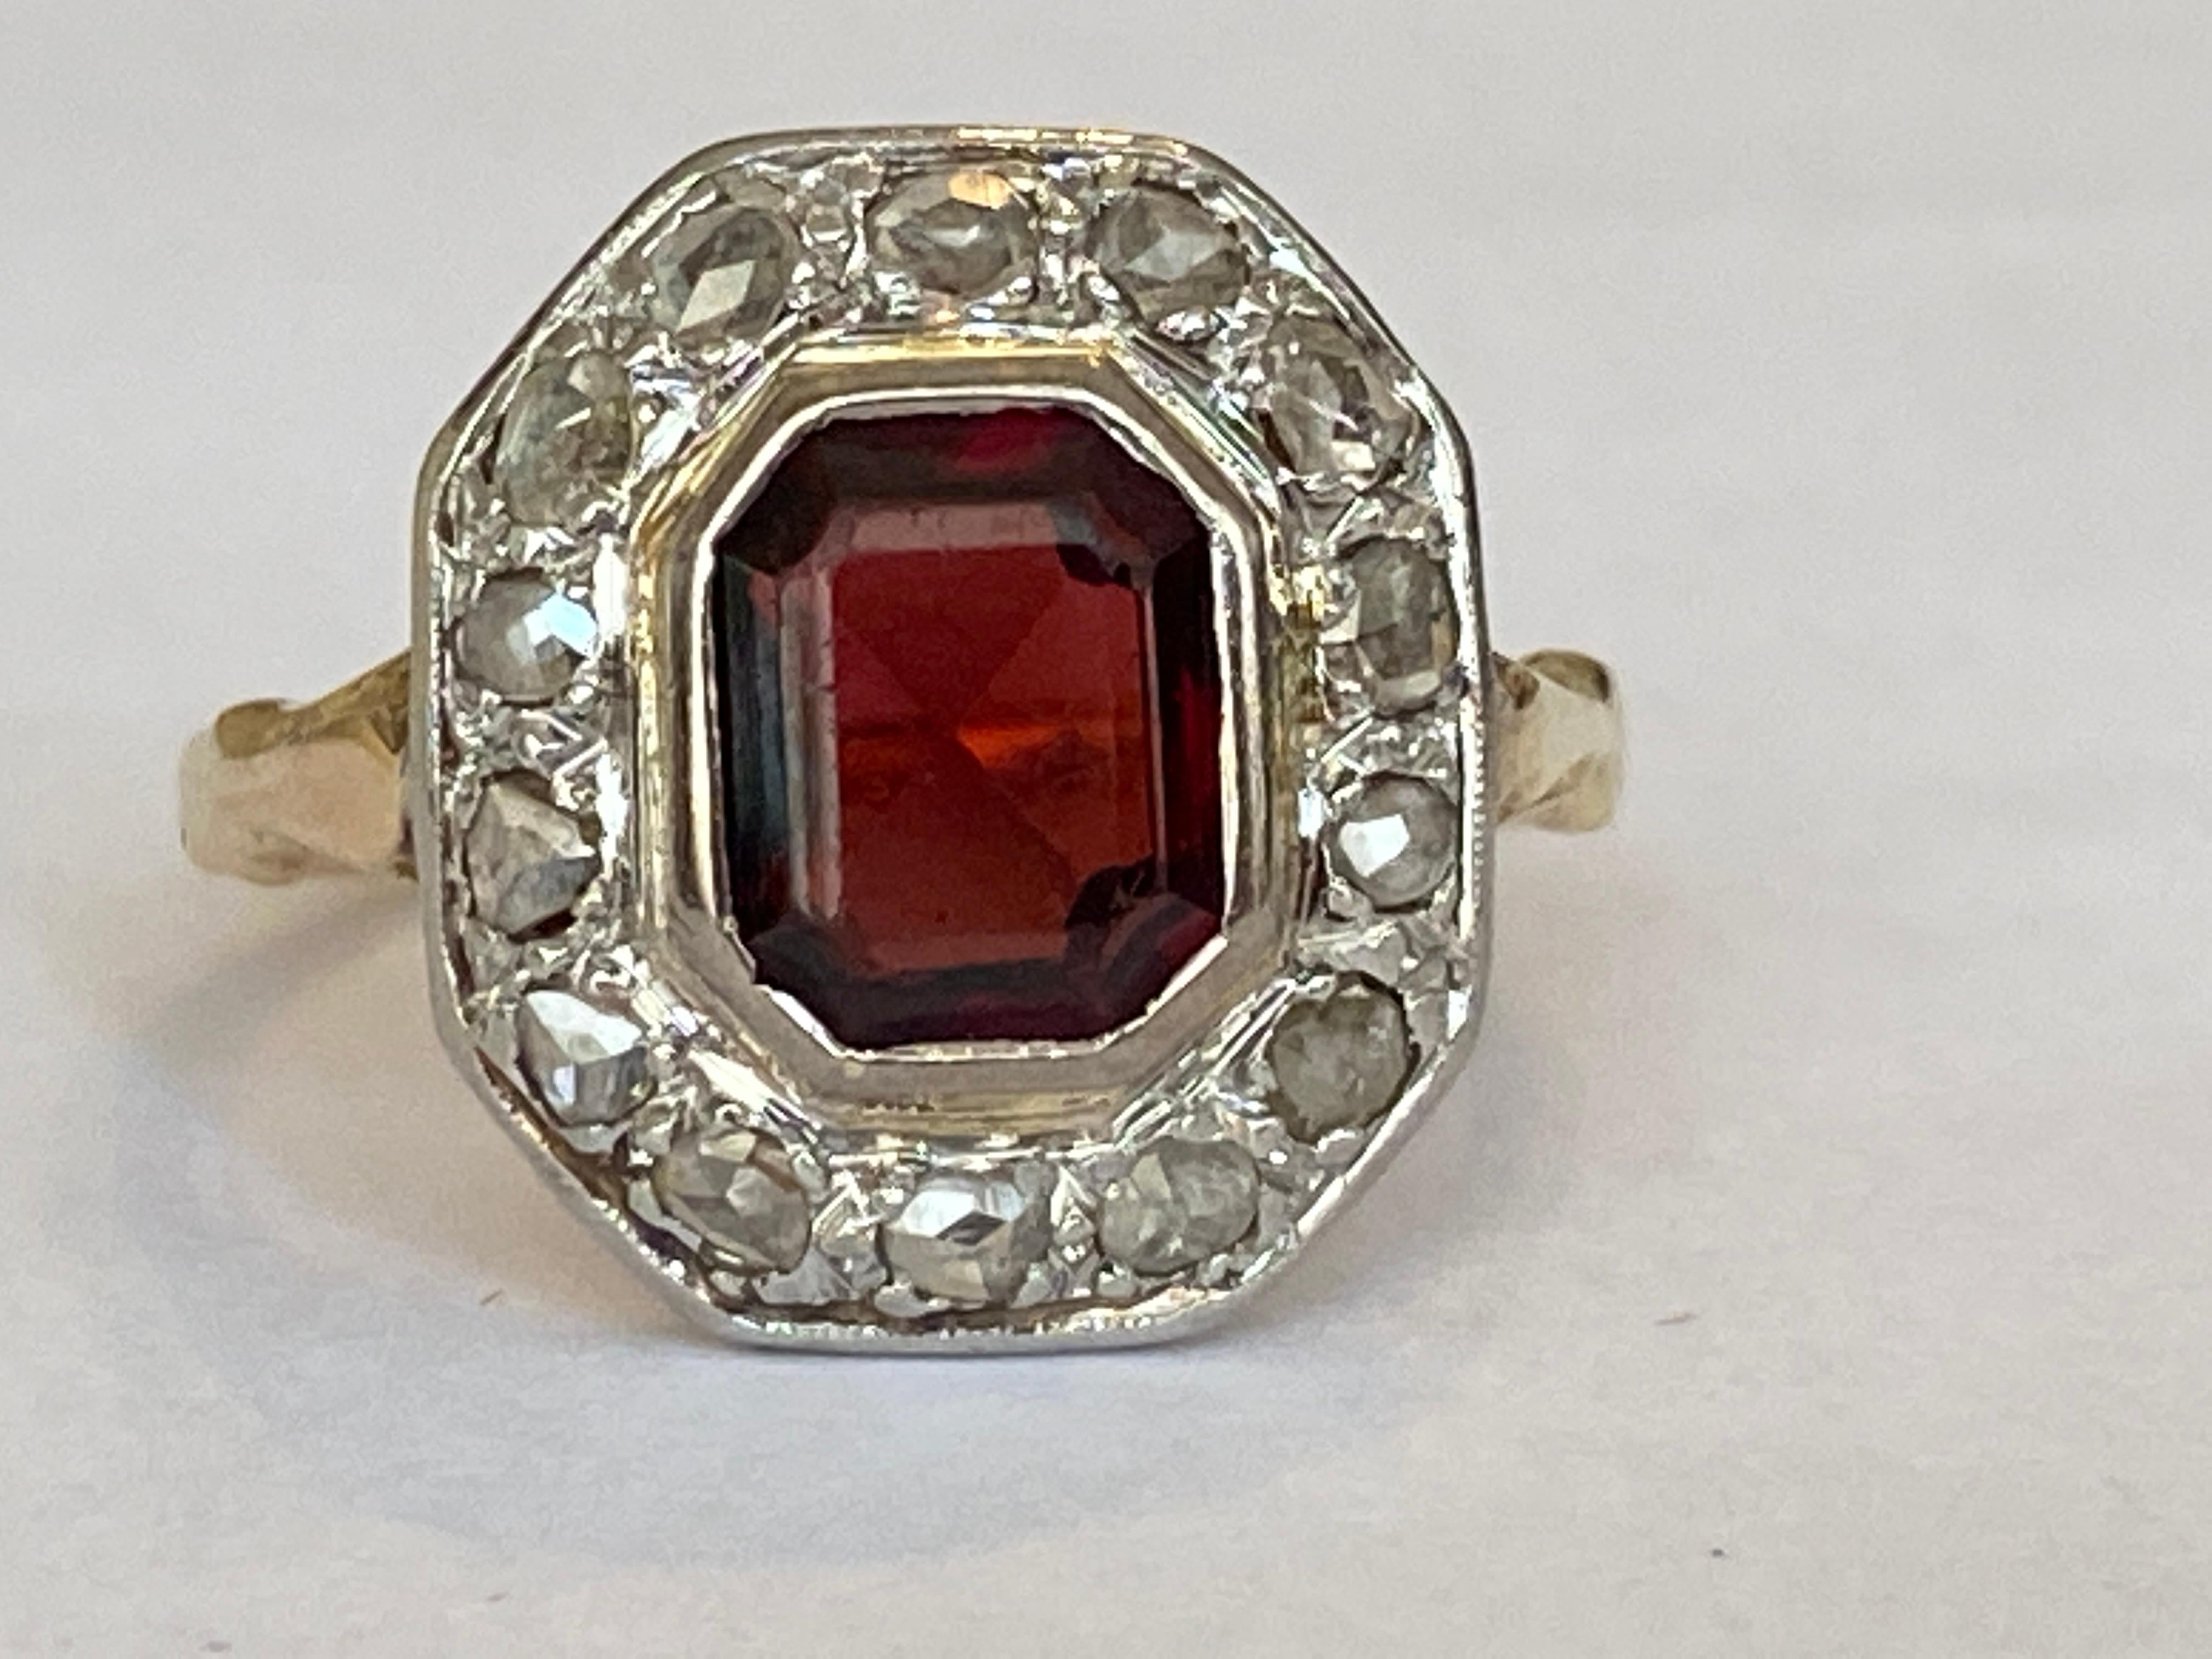 Beautiful 18 carat gold vintage  ring set with an emerald cut garnet of approximately 2.00 crt and surrounded by an entourage of rose cut diamonds of approximately 0.60 crt. The stone has signs of wear.
Grade: 18KT (approved 750)
Weight: 4